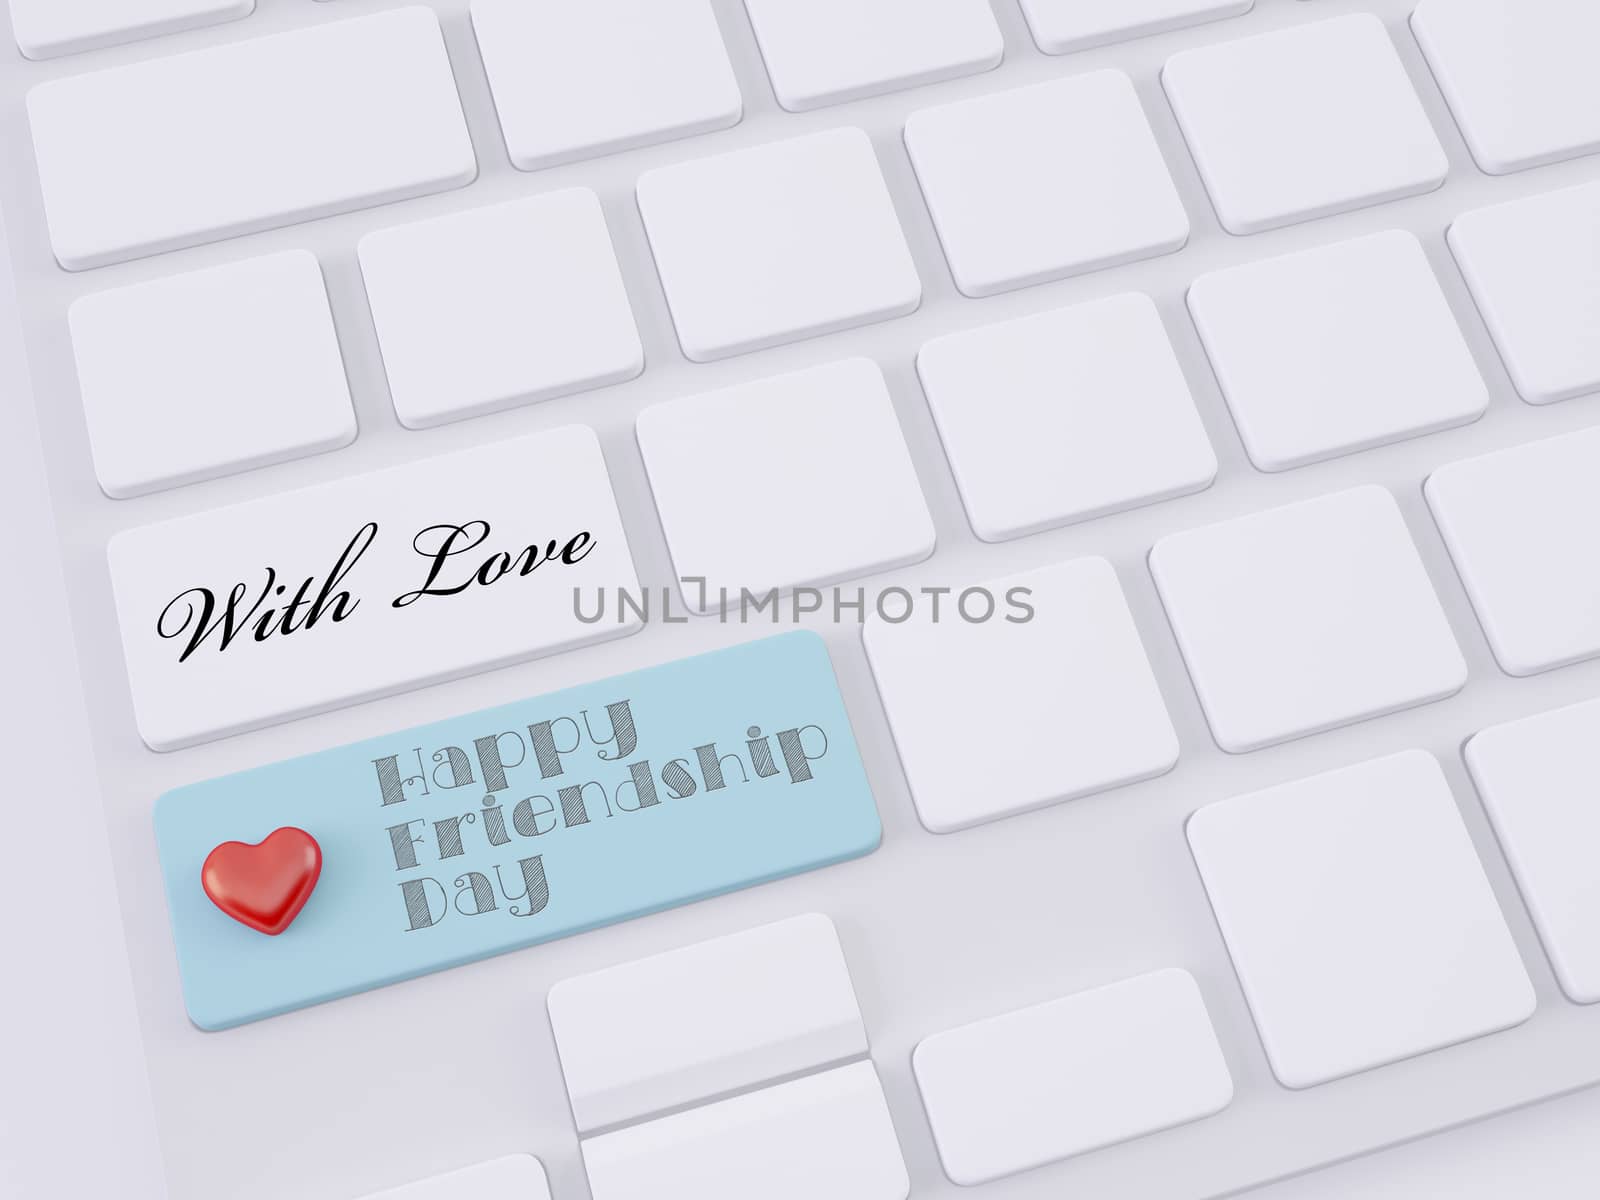 with love heart on shift key, happy friendship day concept